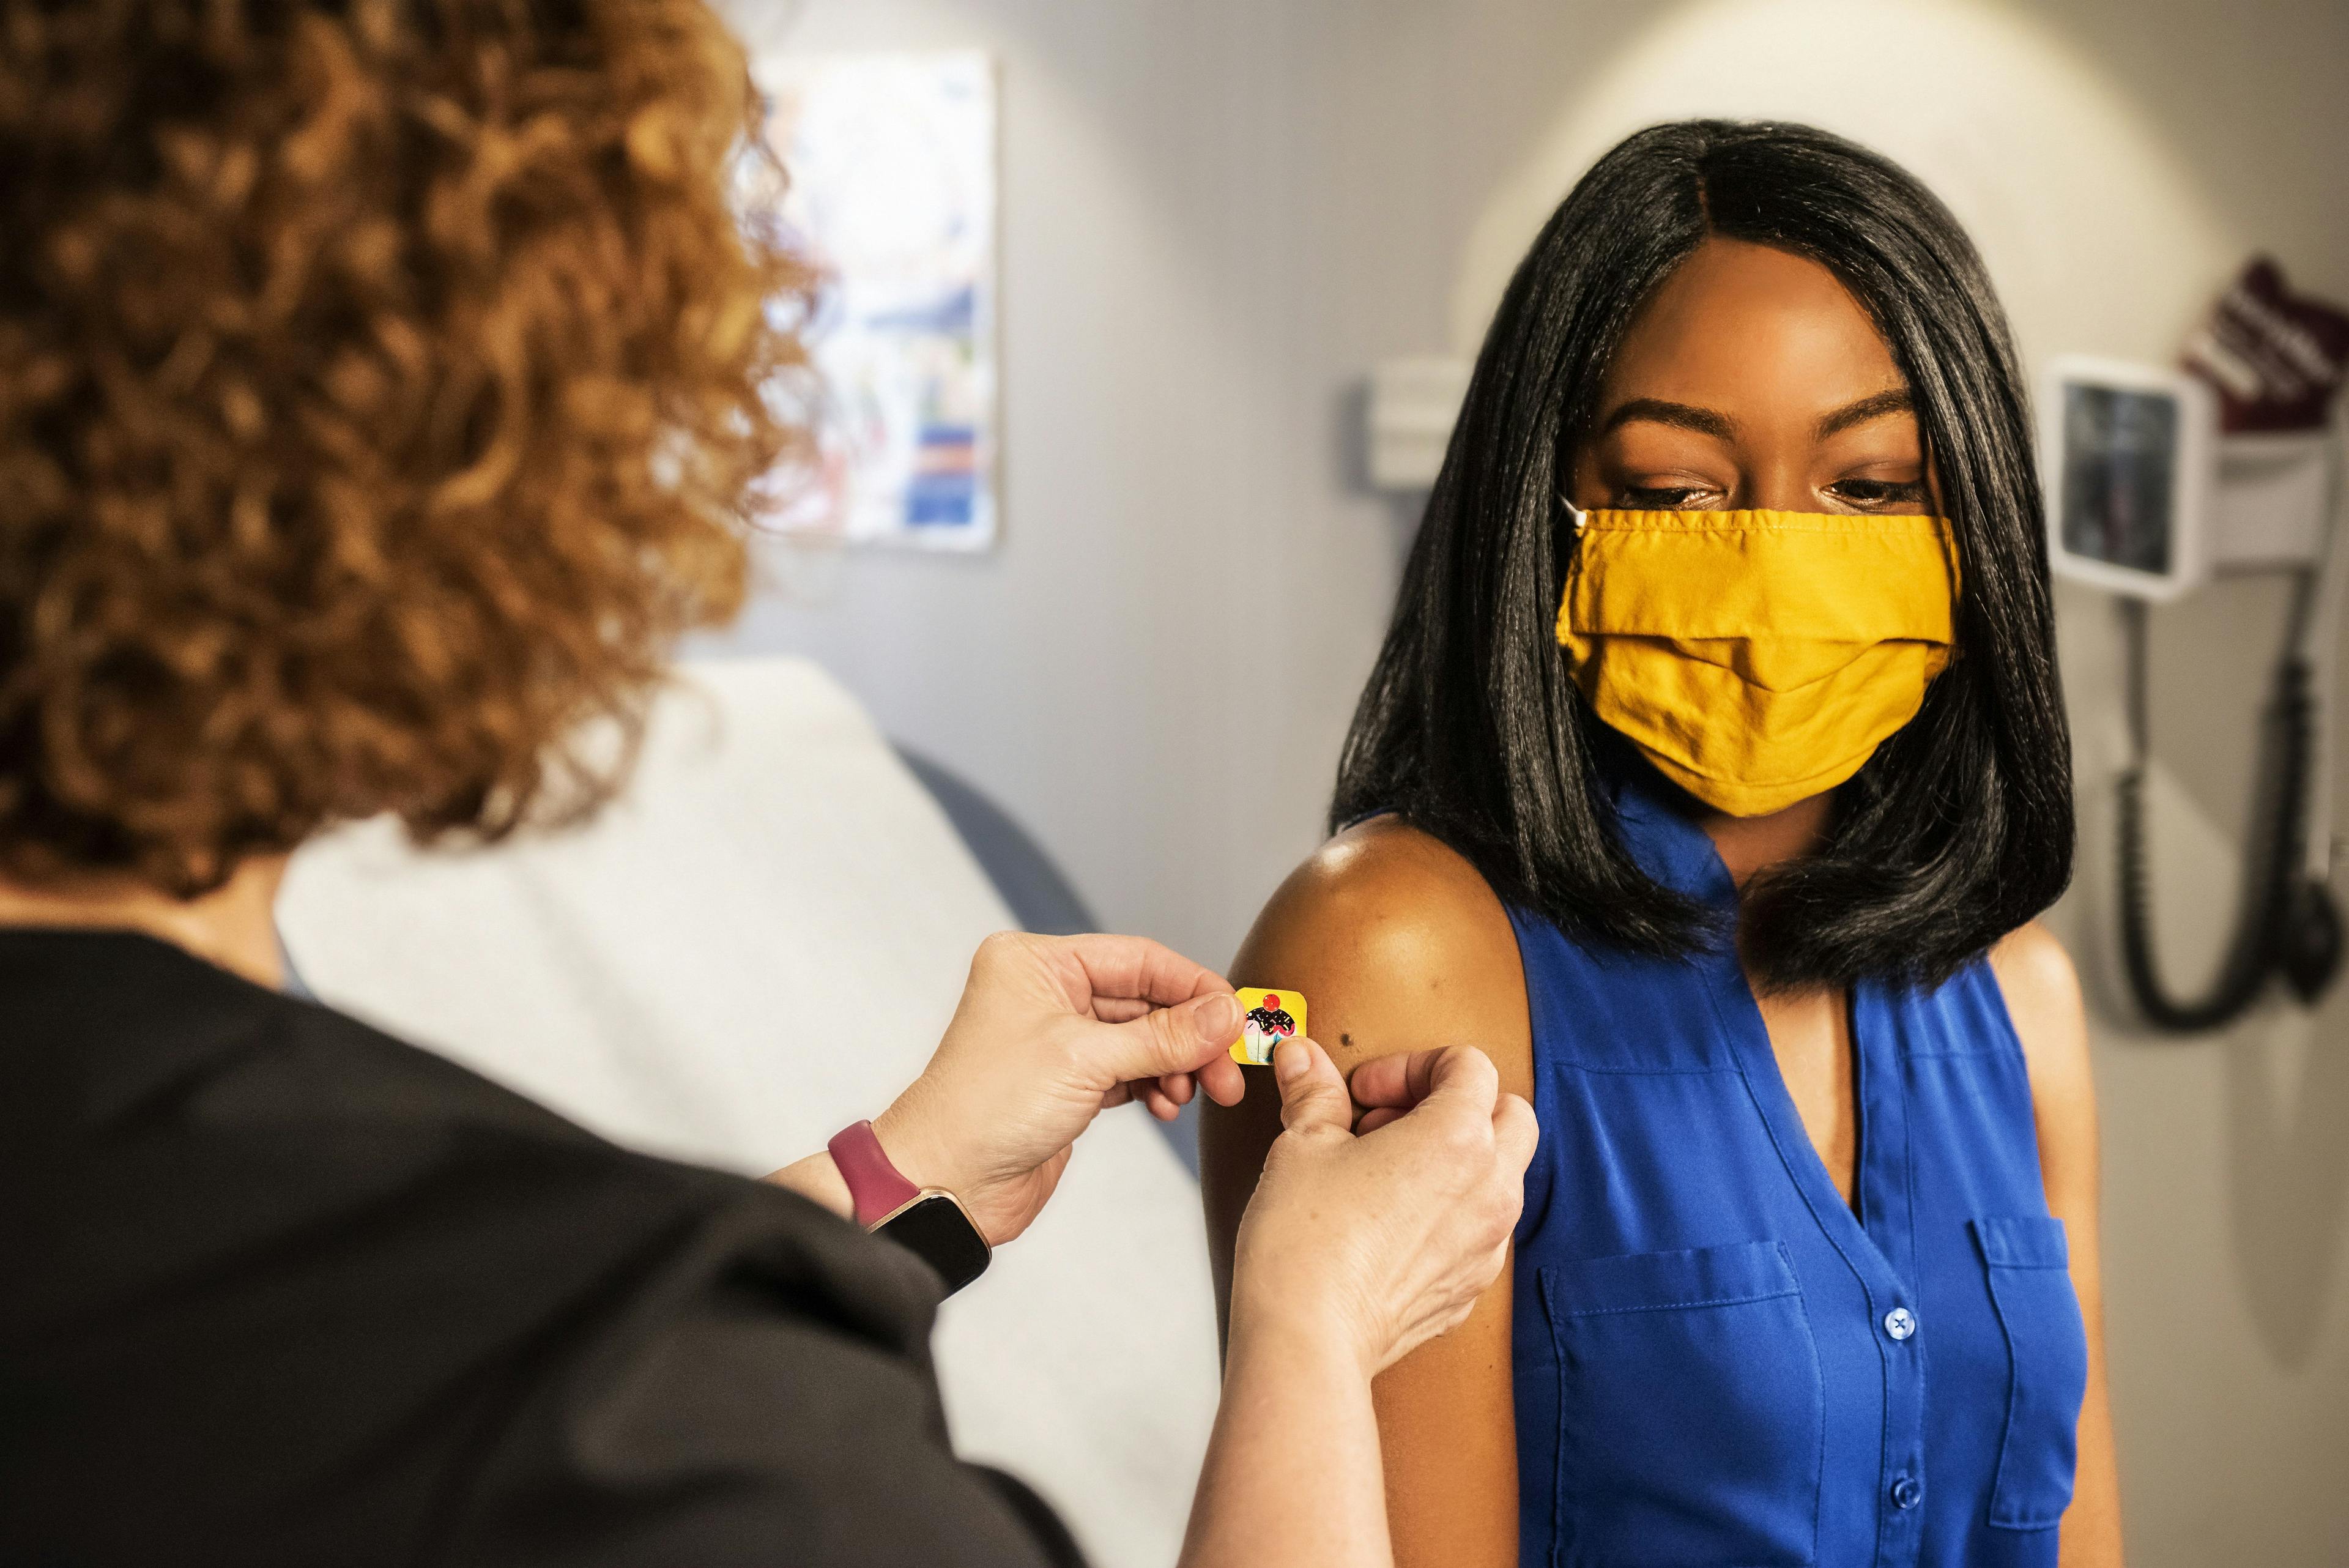 The median vaccination rate of white American adults was found to be 1.3 times higher than Black and Hispanic adults.